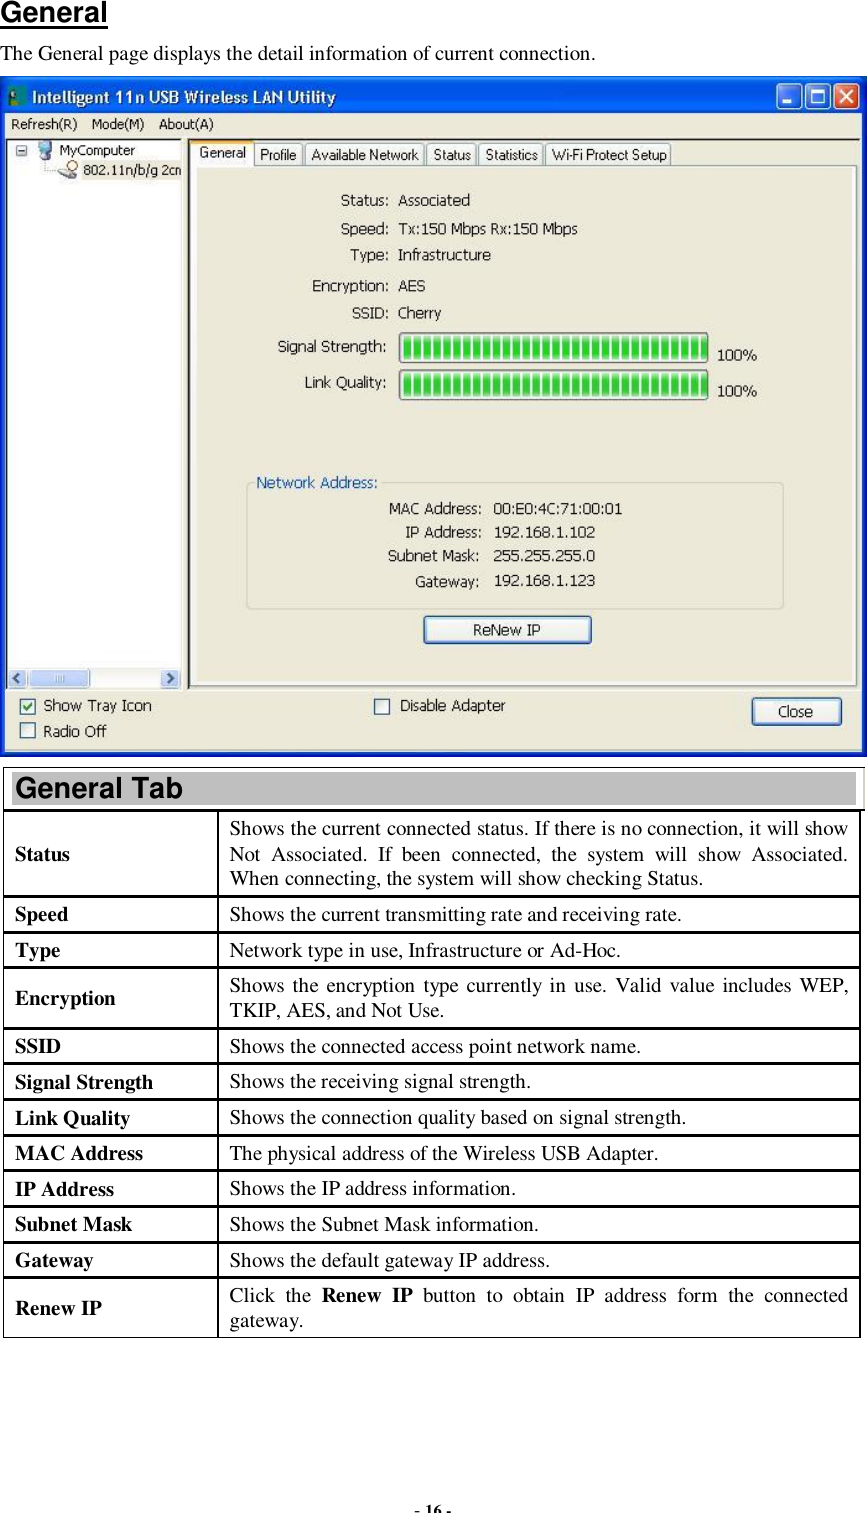  - 16 -  General The General page displays the detail information of current connection.  General Tab Status  Shows the current connected status. If there is no connection, it will show Not Associated. If been connected, the system will show Associated. When connecting, the system will show checking Status. Speed  Shows the current transmitting rate and receiving rate. Type  Network type in use, Infrastructure or Ad-Hoc. Encryption  Shows the encryption type currently in use. Valid value includes WEP, TKIP, AES, and Not Use. SSID  Shows the connected access point network name. Signal Strength  Shows the receiving signal strength. Link Quality  Shows the connection quality based on signal strength. MAC Address  The physical address of the Wireless USB Adapter. IP Address  Shows the IP address information. Subnet Mask  Shows the Subnet Mask information. Gateway  Shows the default gateway IP address. Renew IP  Click the  Renew IP button to obtain IP address form the connected gateway. 